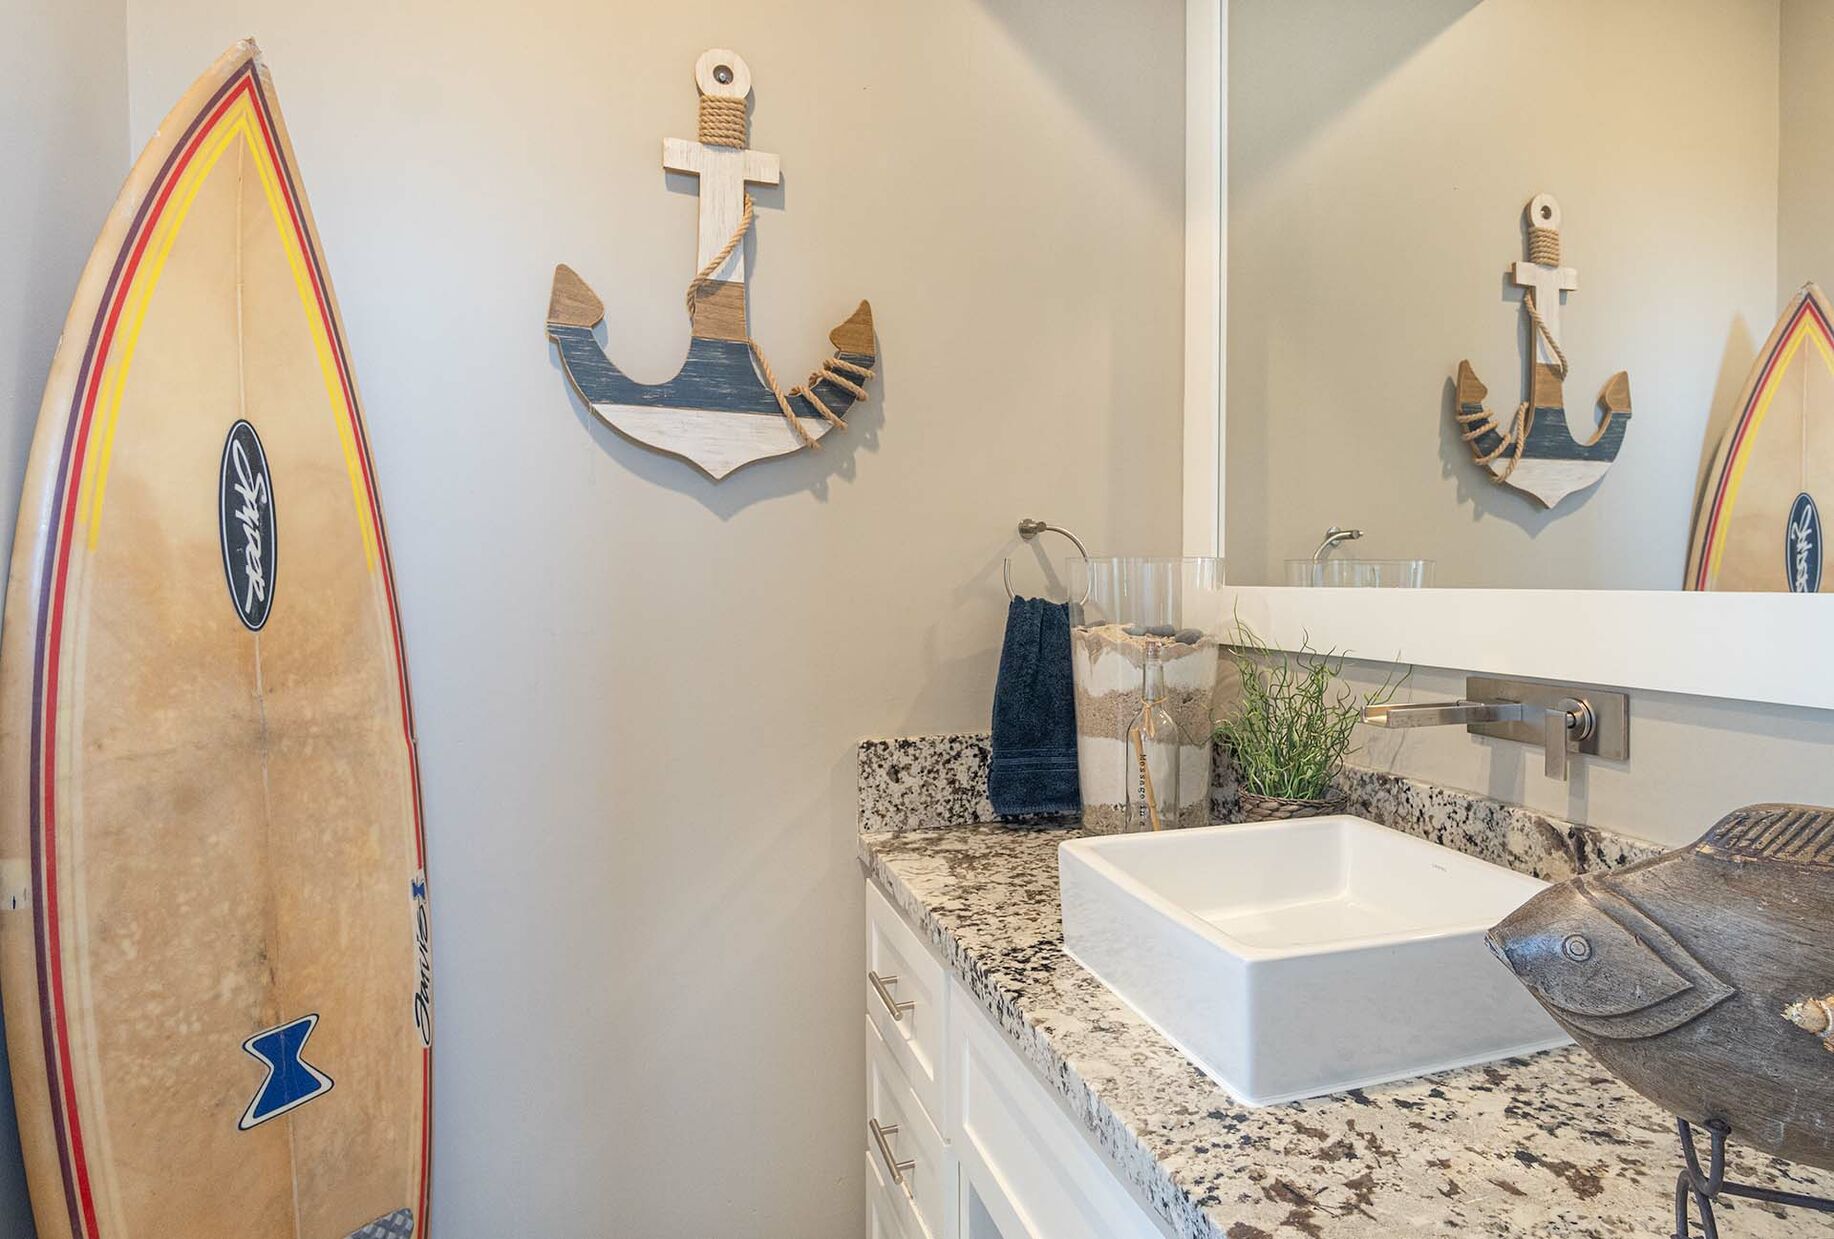 Surf and more. Bathroom detail.